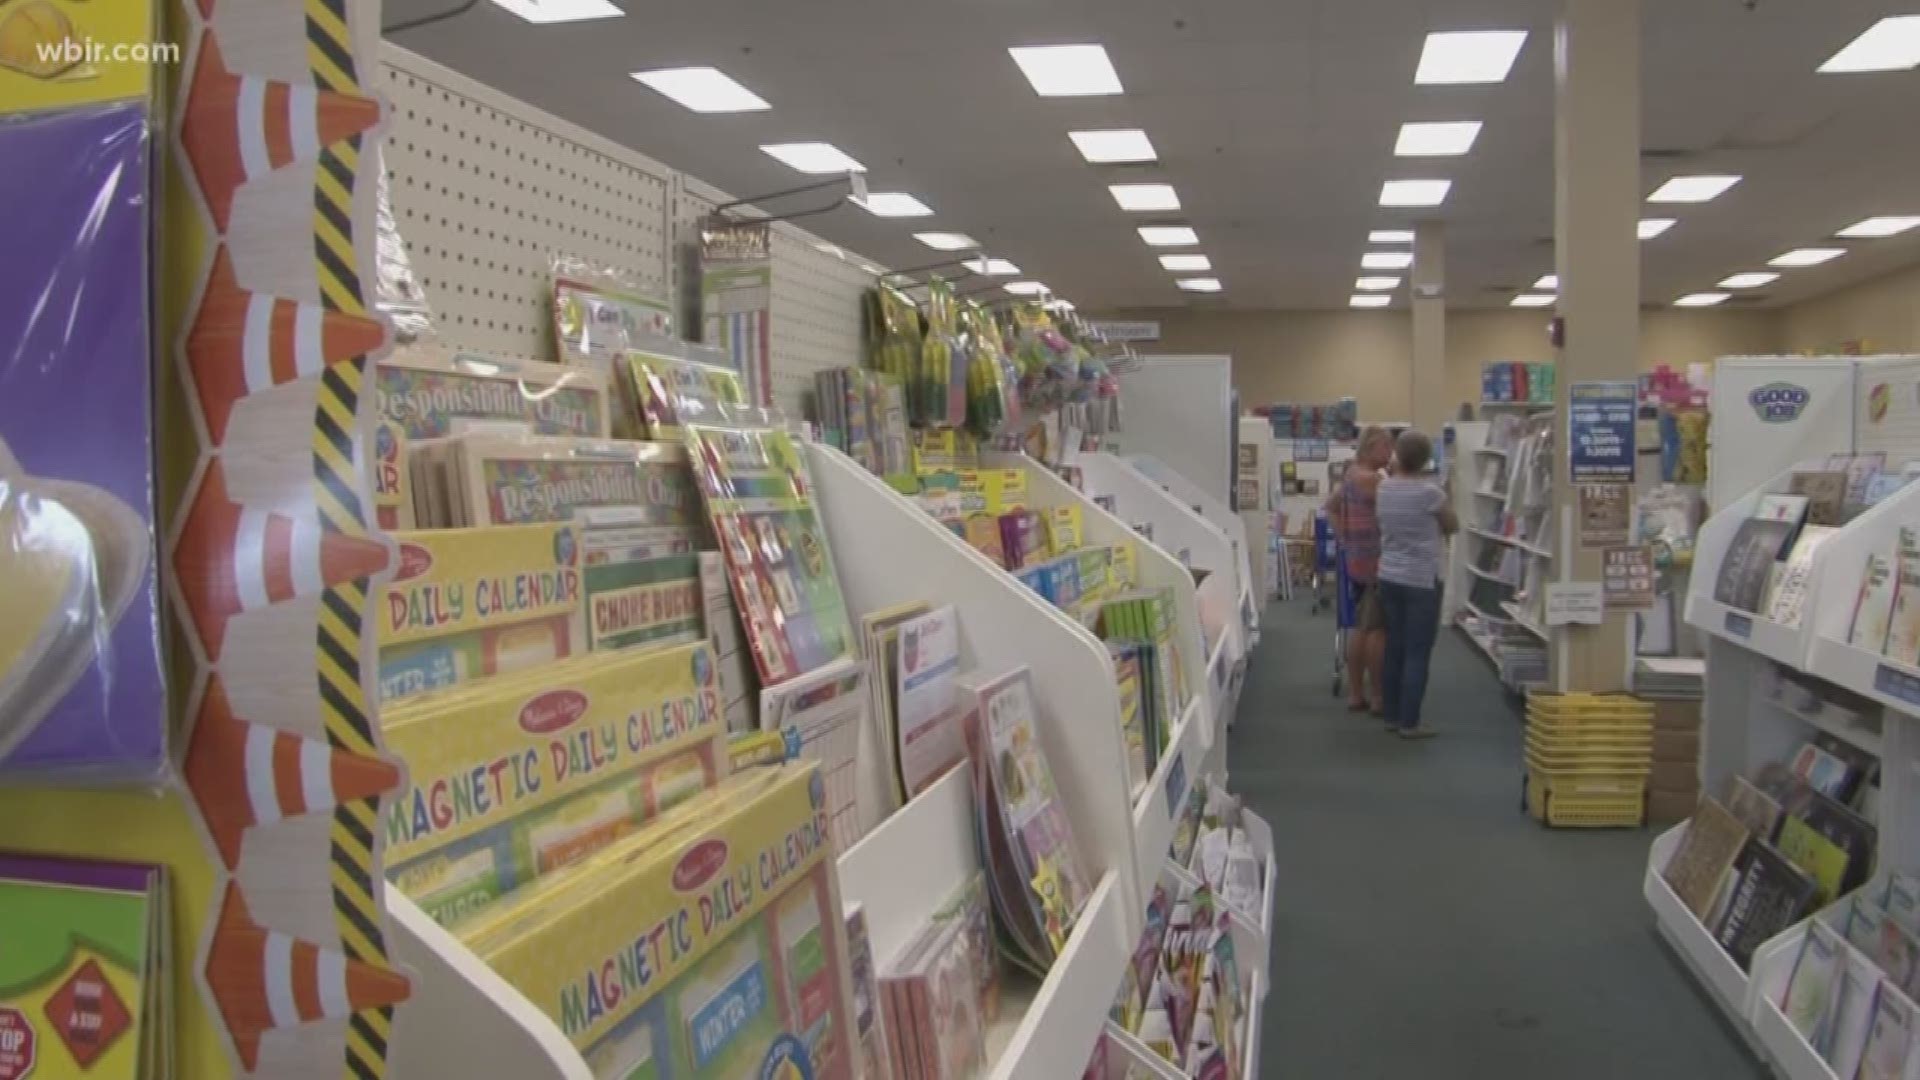 The holiday is great for students to stock up, but it's huge for teachers too. 10News Reporter Katie Inman introduced us to a mother-daughter teacher duo who said tax-free weekend is like Christmas, but they still feel the pain in their own pockets.